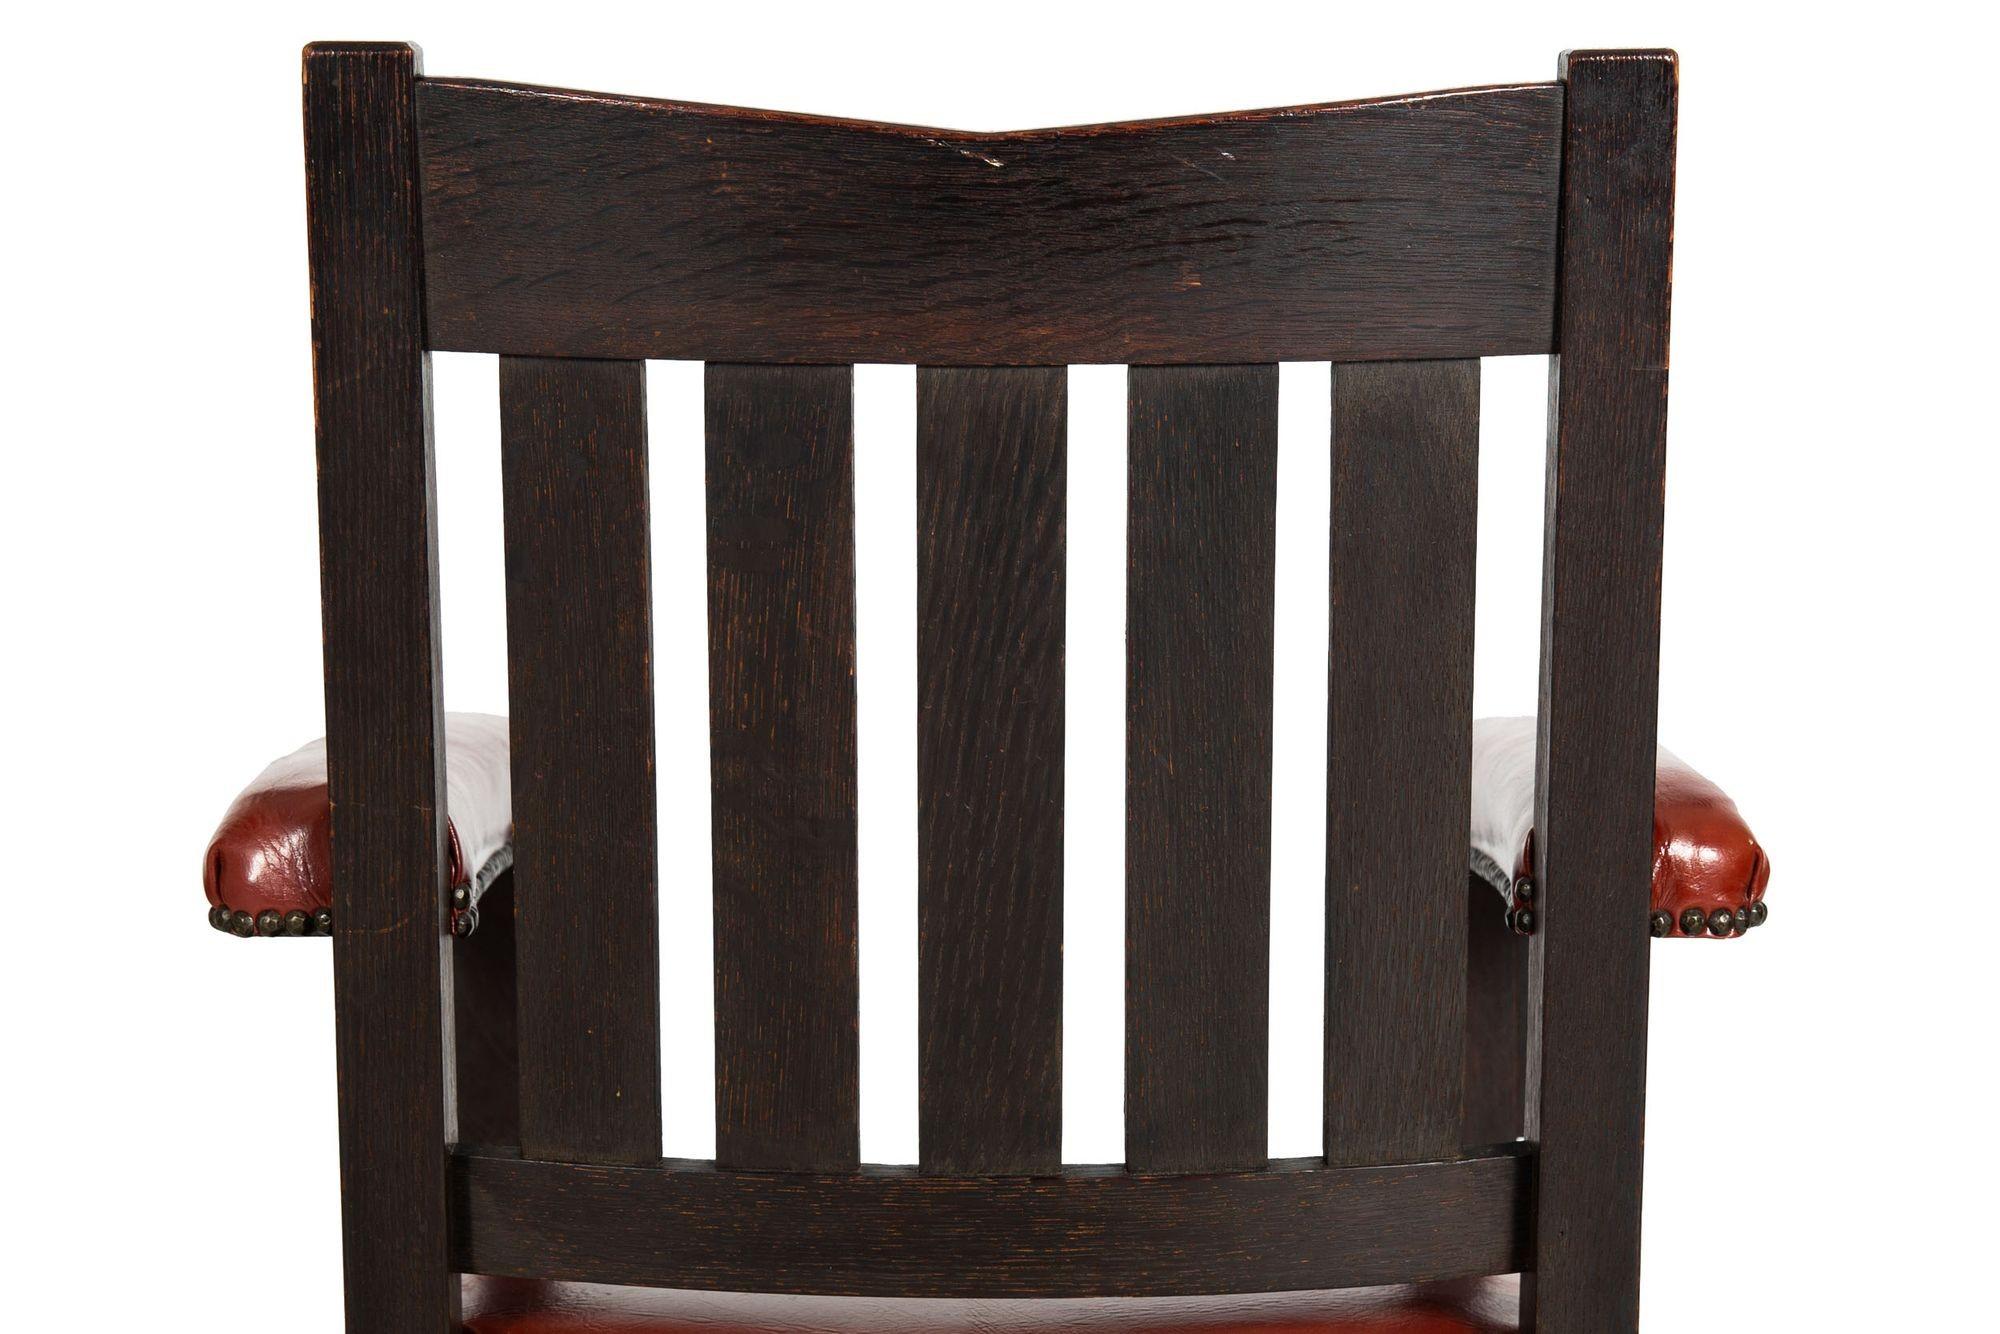 20th Century Arts & Crafts Fumed Oak Rocking Chair by Gustave Stickley, no. 311 1/2 For Sale